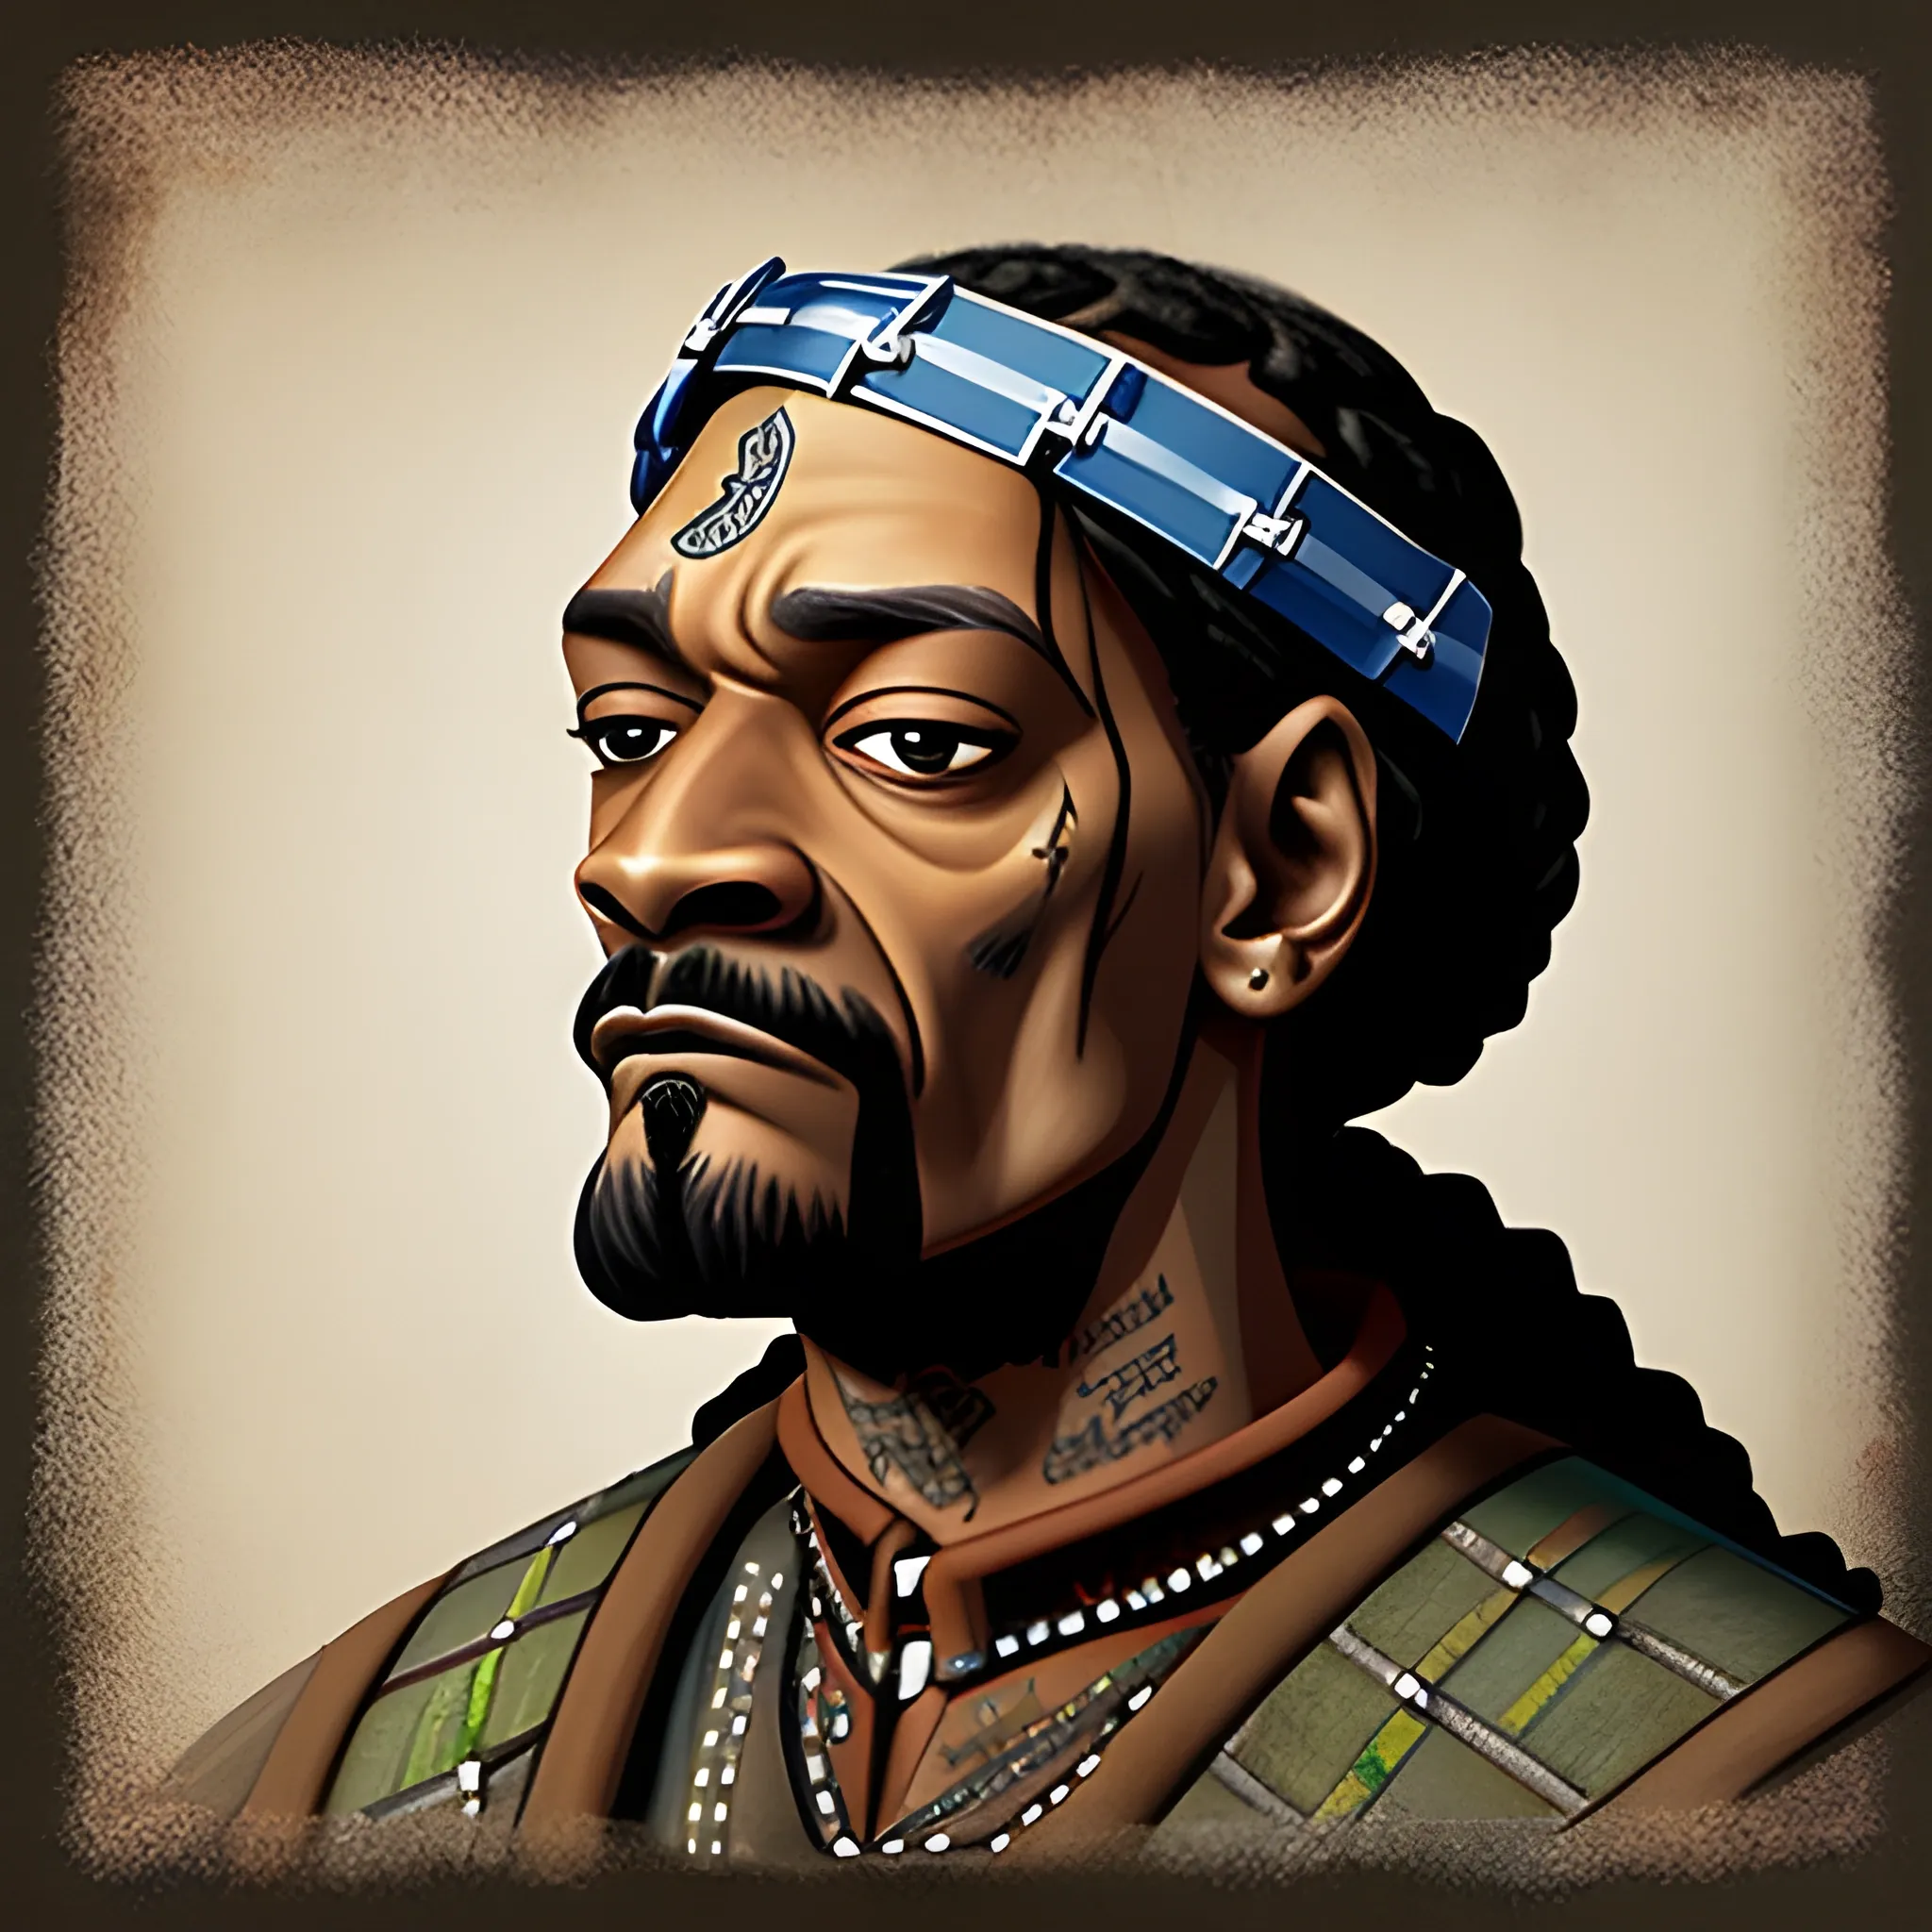 Portrait of snoop dogg as William wallace from Braveheart movie, Cartoon